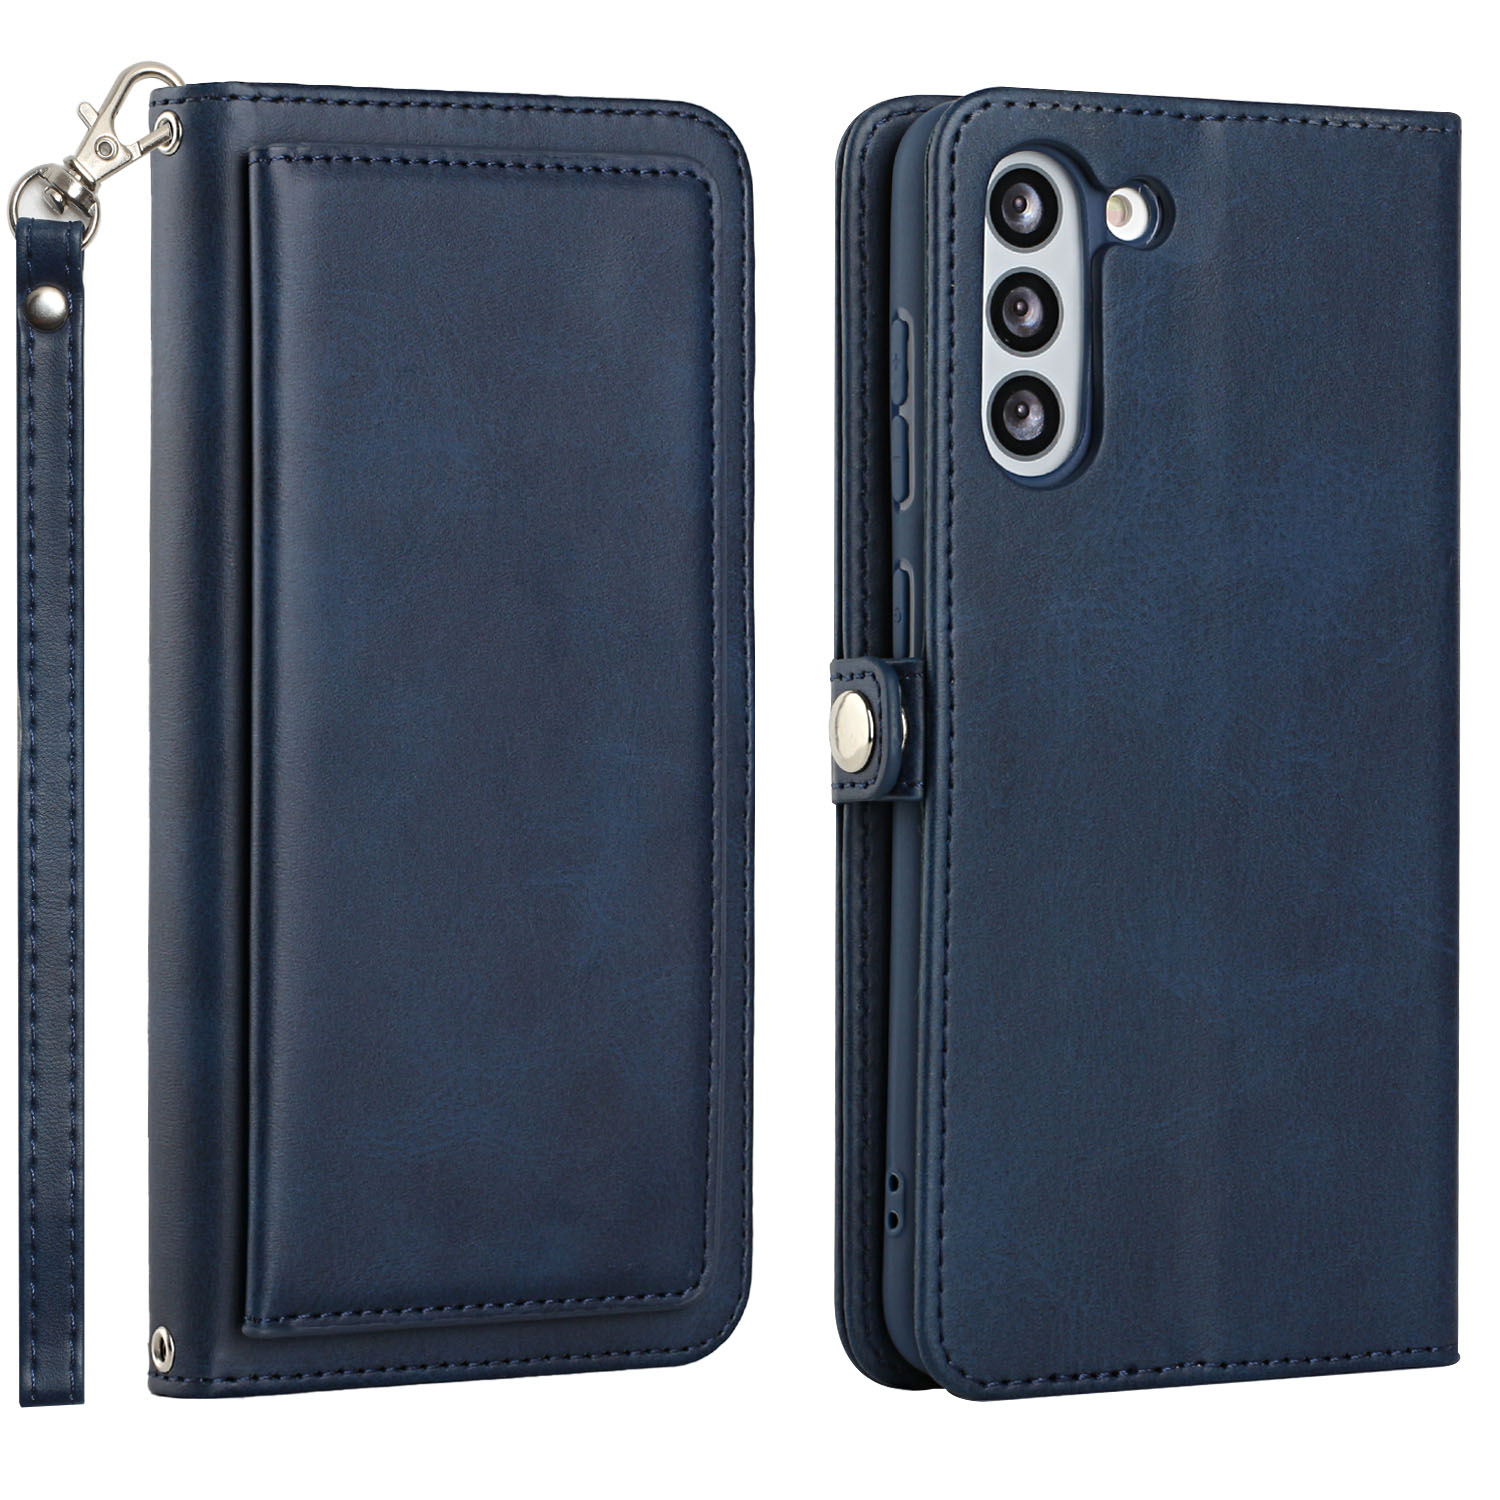 Premium PU Leather Folio WALLET Front Cover Case for Galaxy S21 FE (Blue)